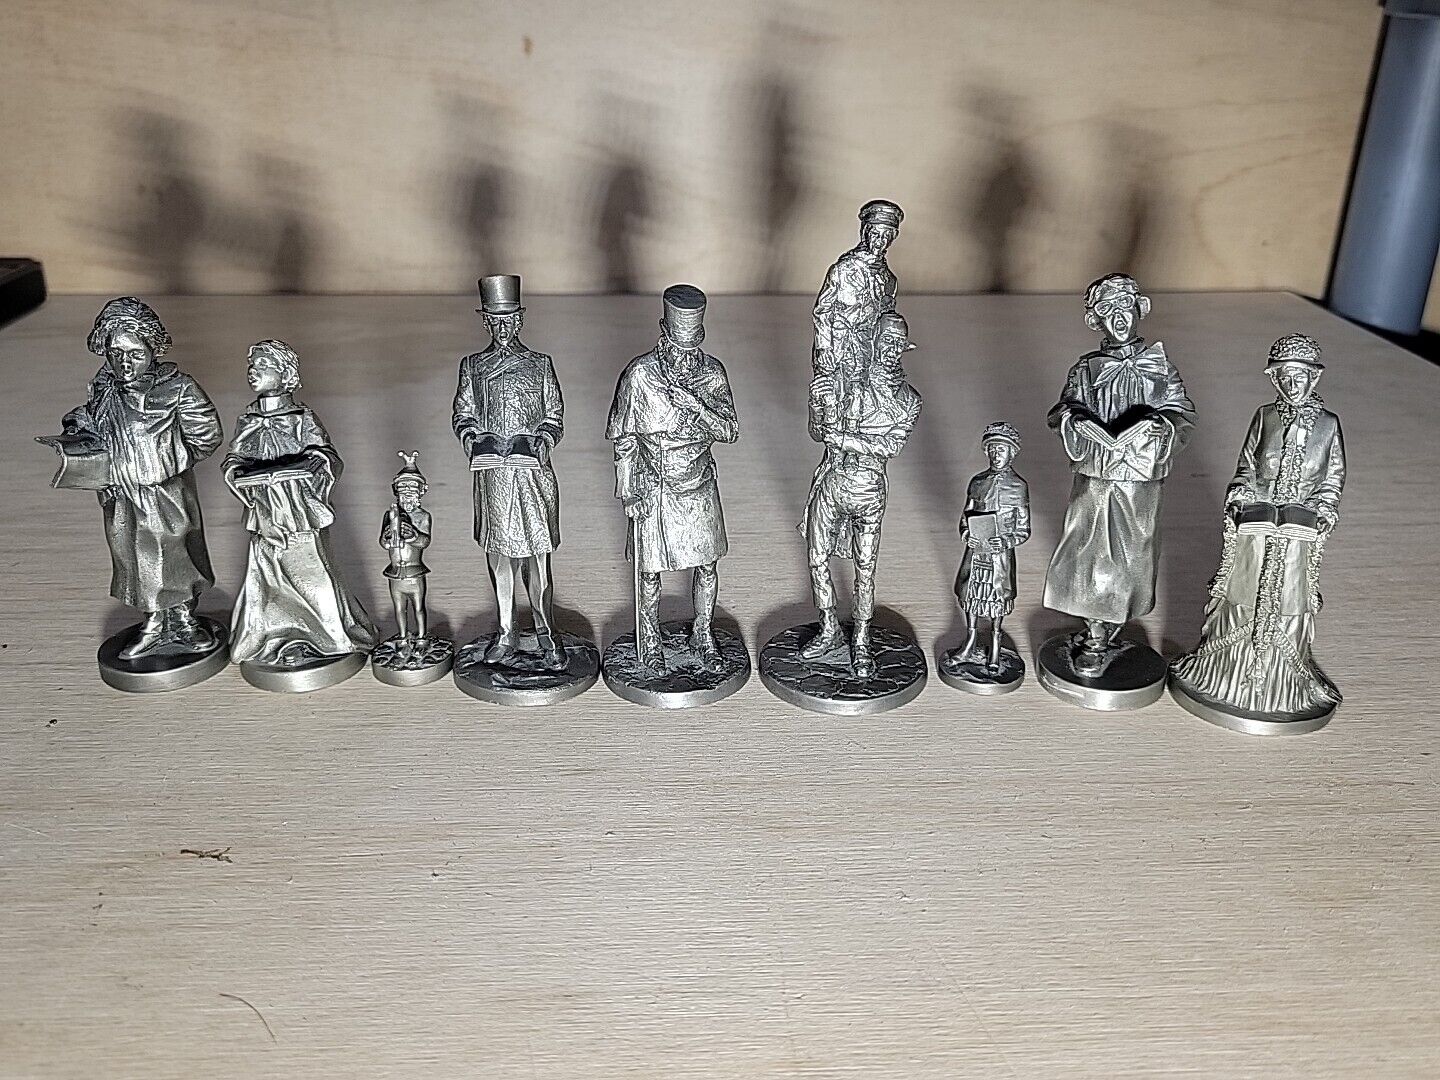 1977-1980 Franklin Mint Pewter Figurines Lot, 9 Pieces